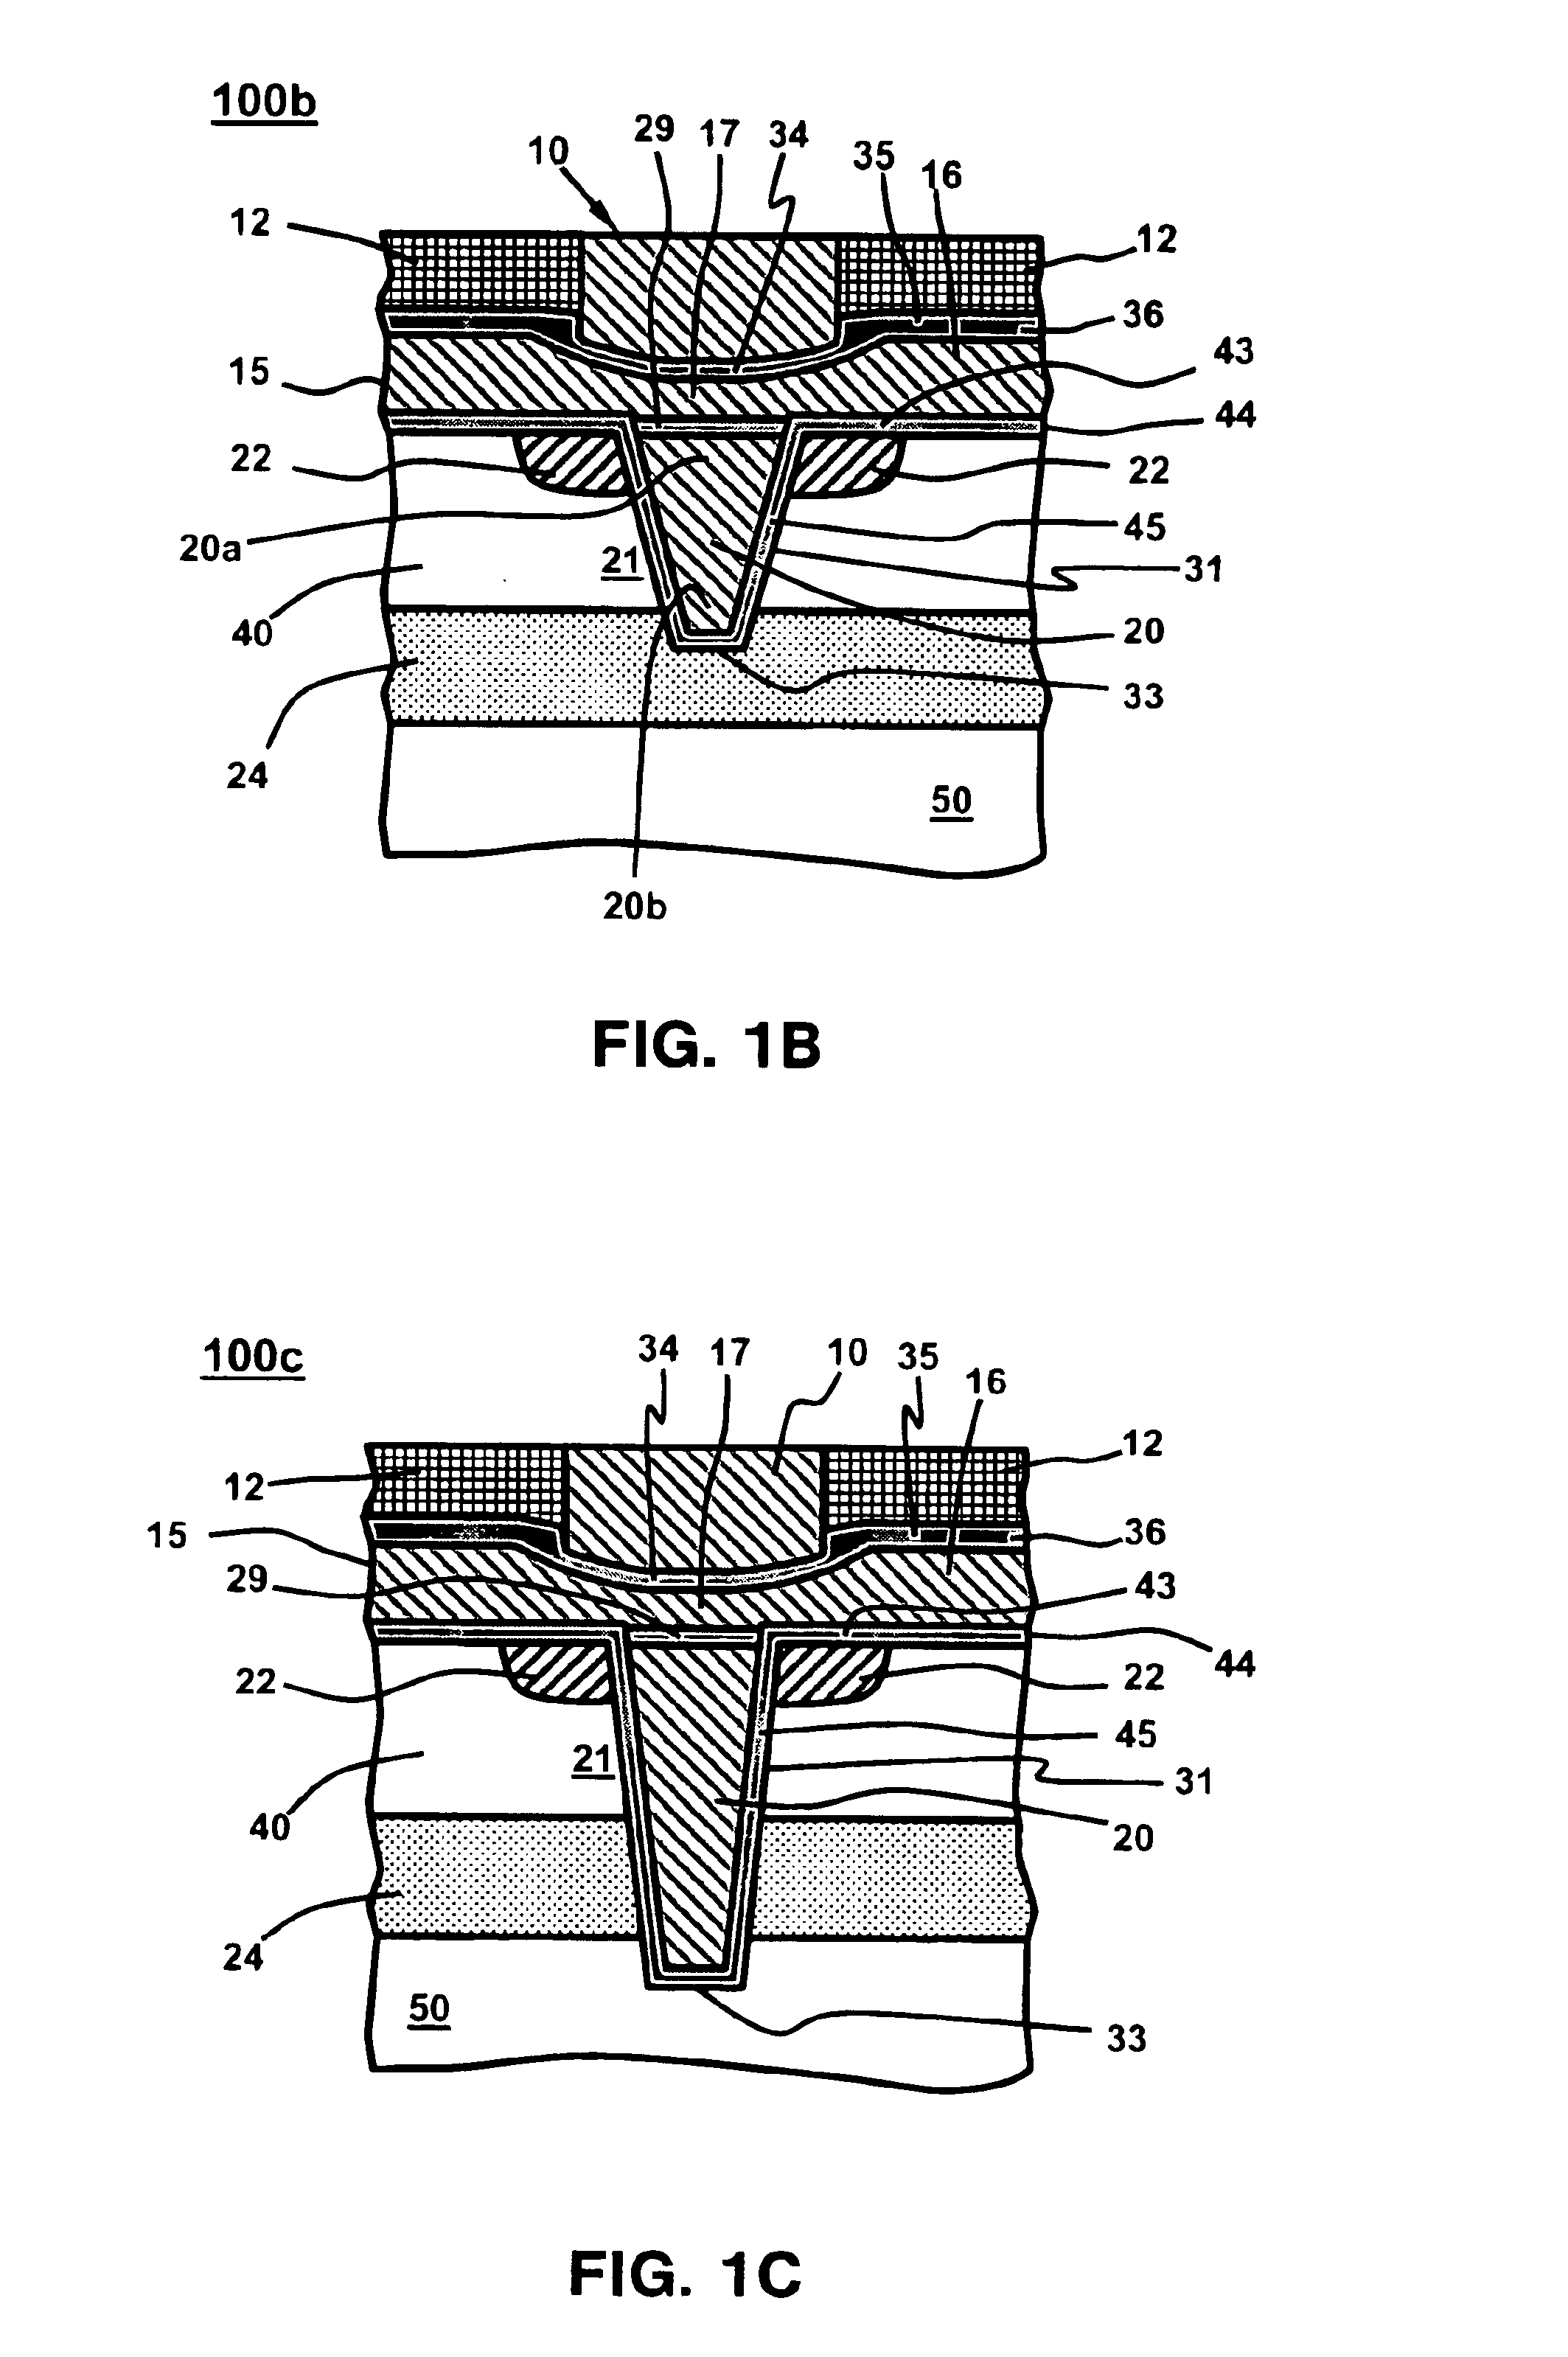 Floating-gate memory cell having trench structure with ballistic-charge injector, and the array of memory cells